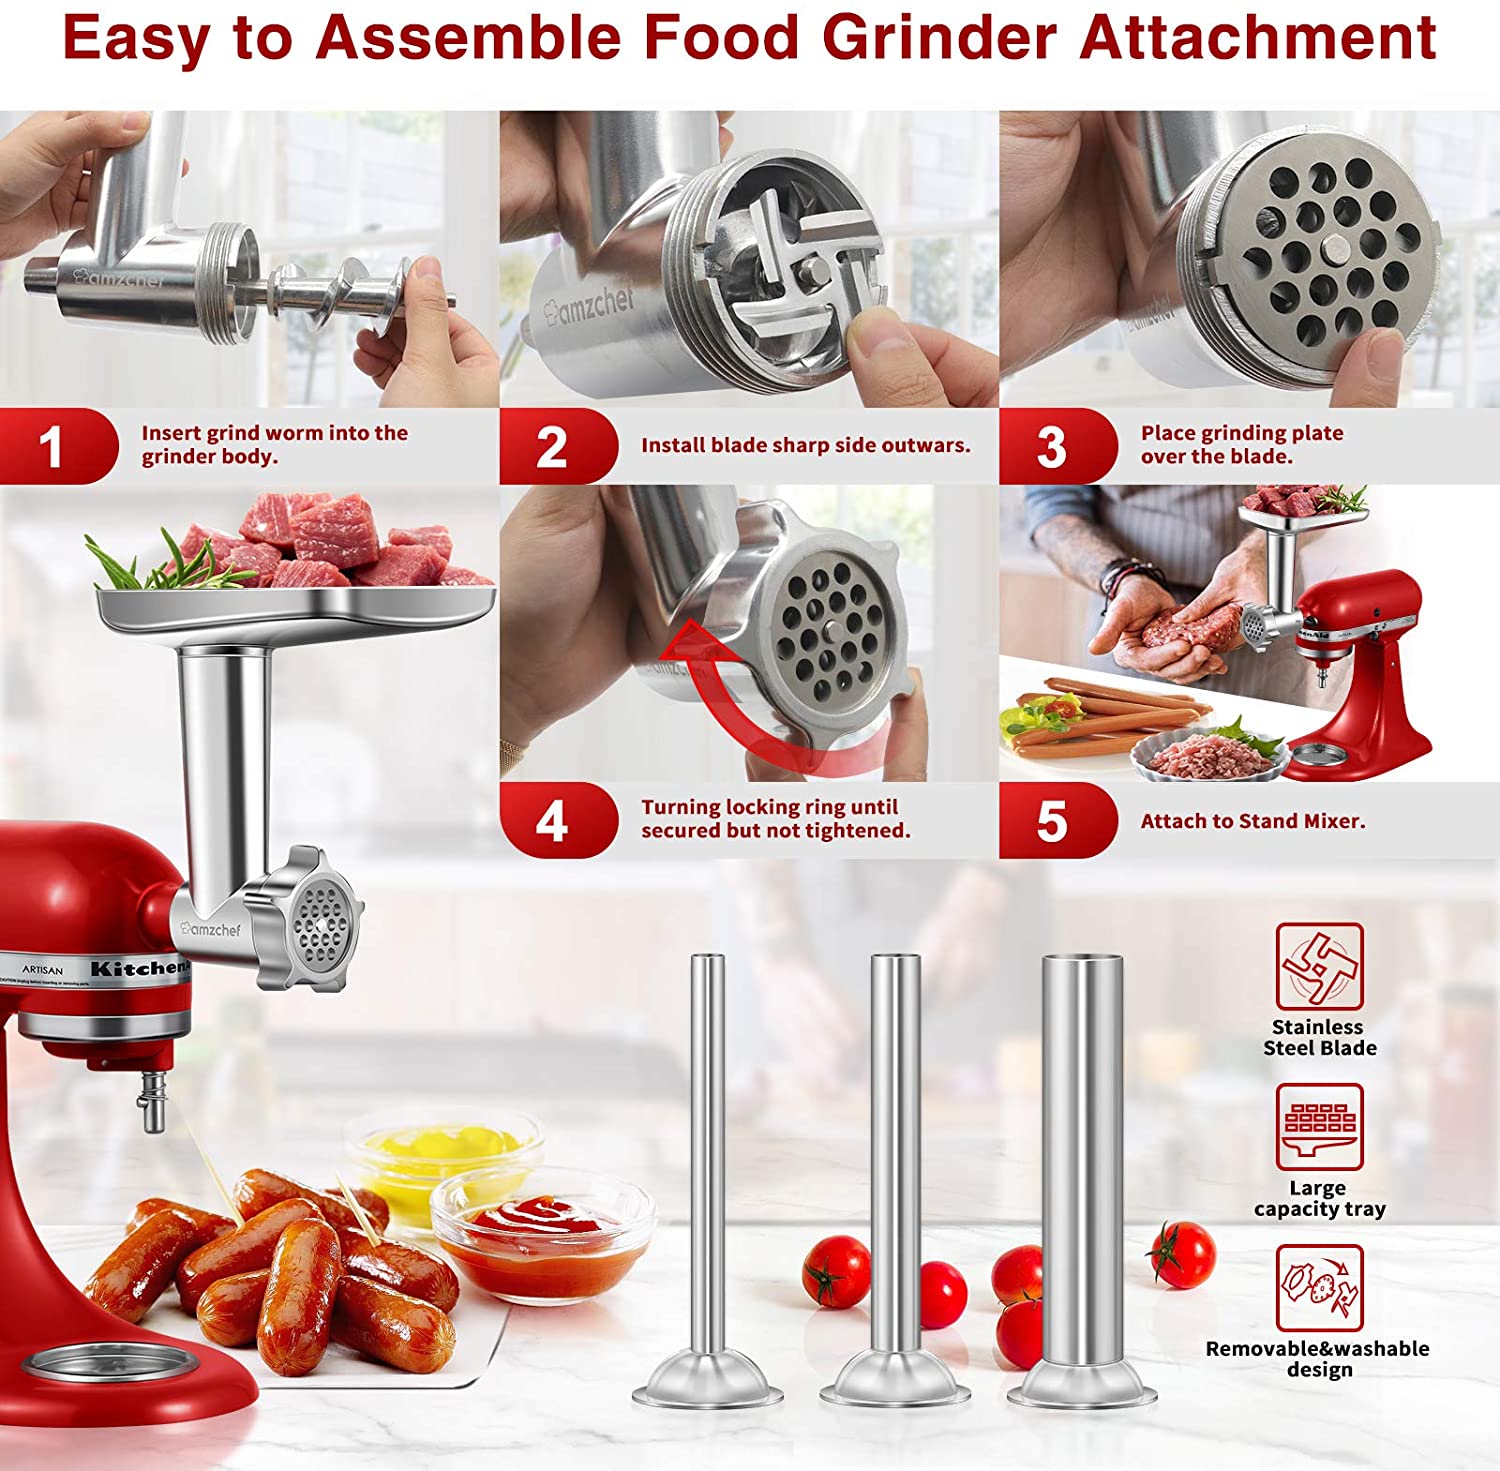 Metal Food Grinder Attachment for KitchenAid Stand Mixers, AMZCHEF Meat Grinder Attachment Included 3 Sausage Stuffer Tubes & A Holder,4 Grinding Plates,2 Grinding Blades, Burger Press,Cleaning Brush